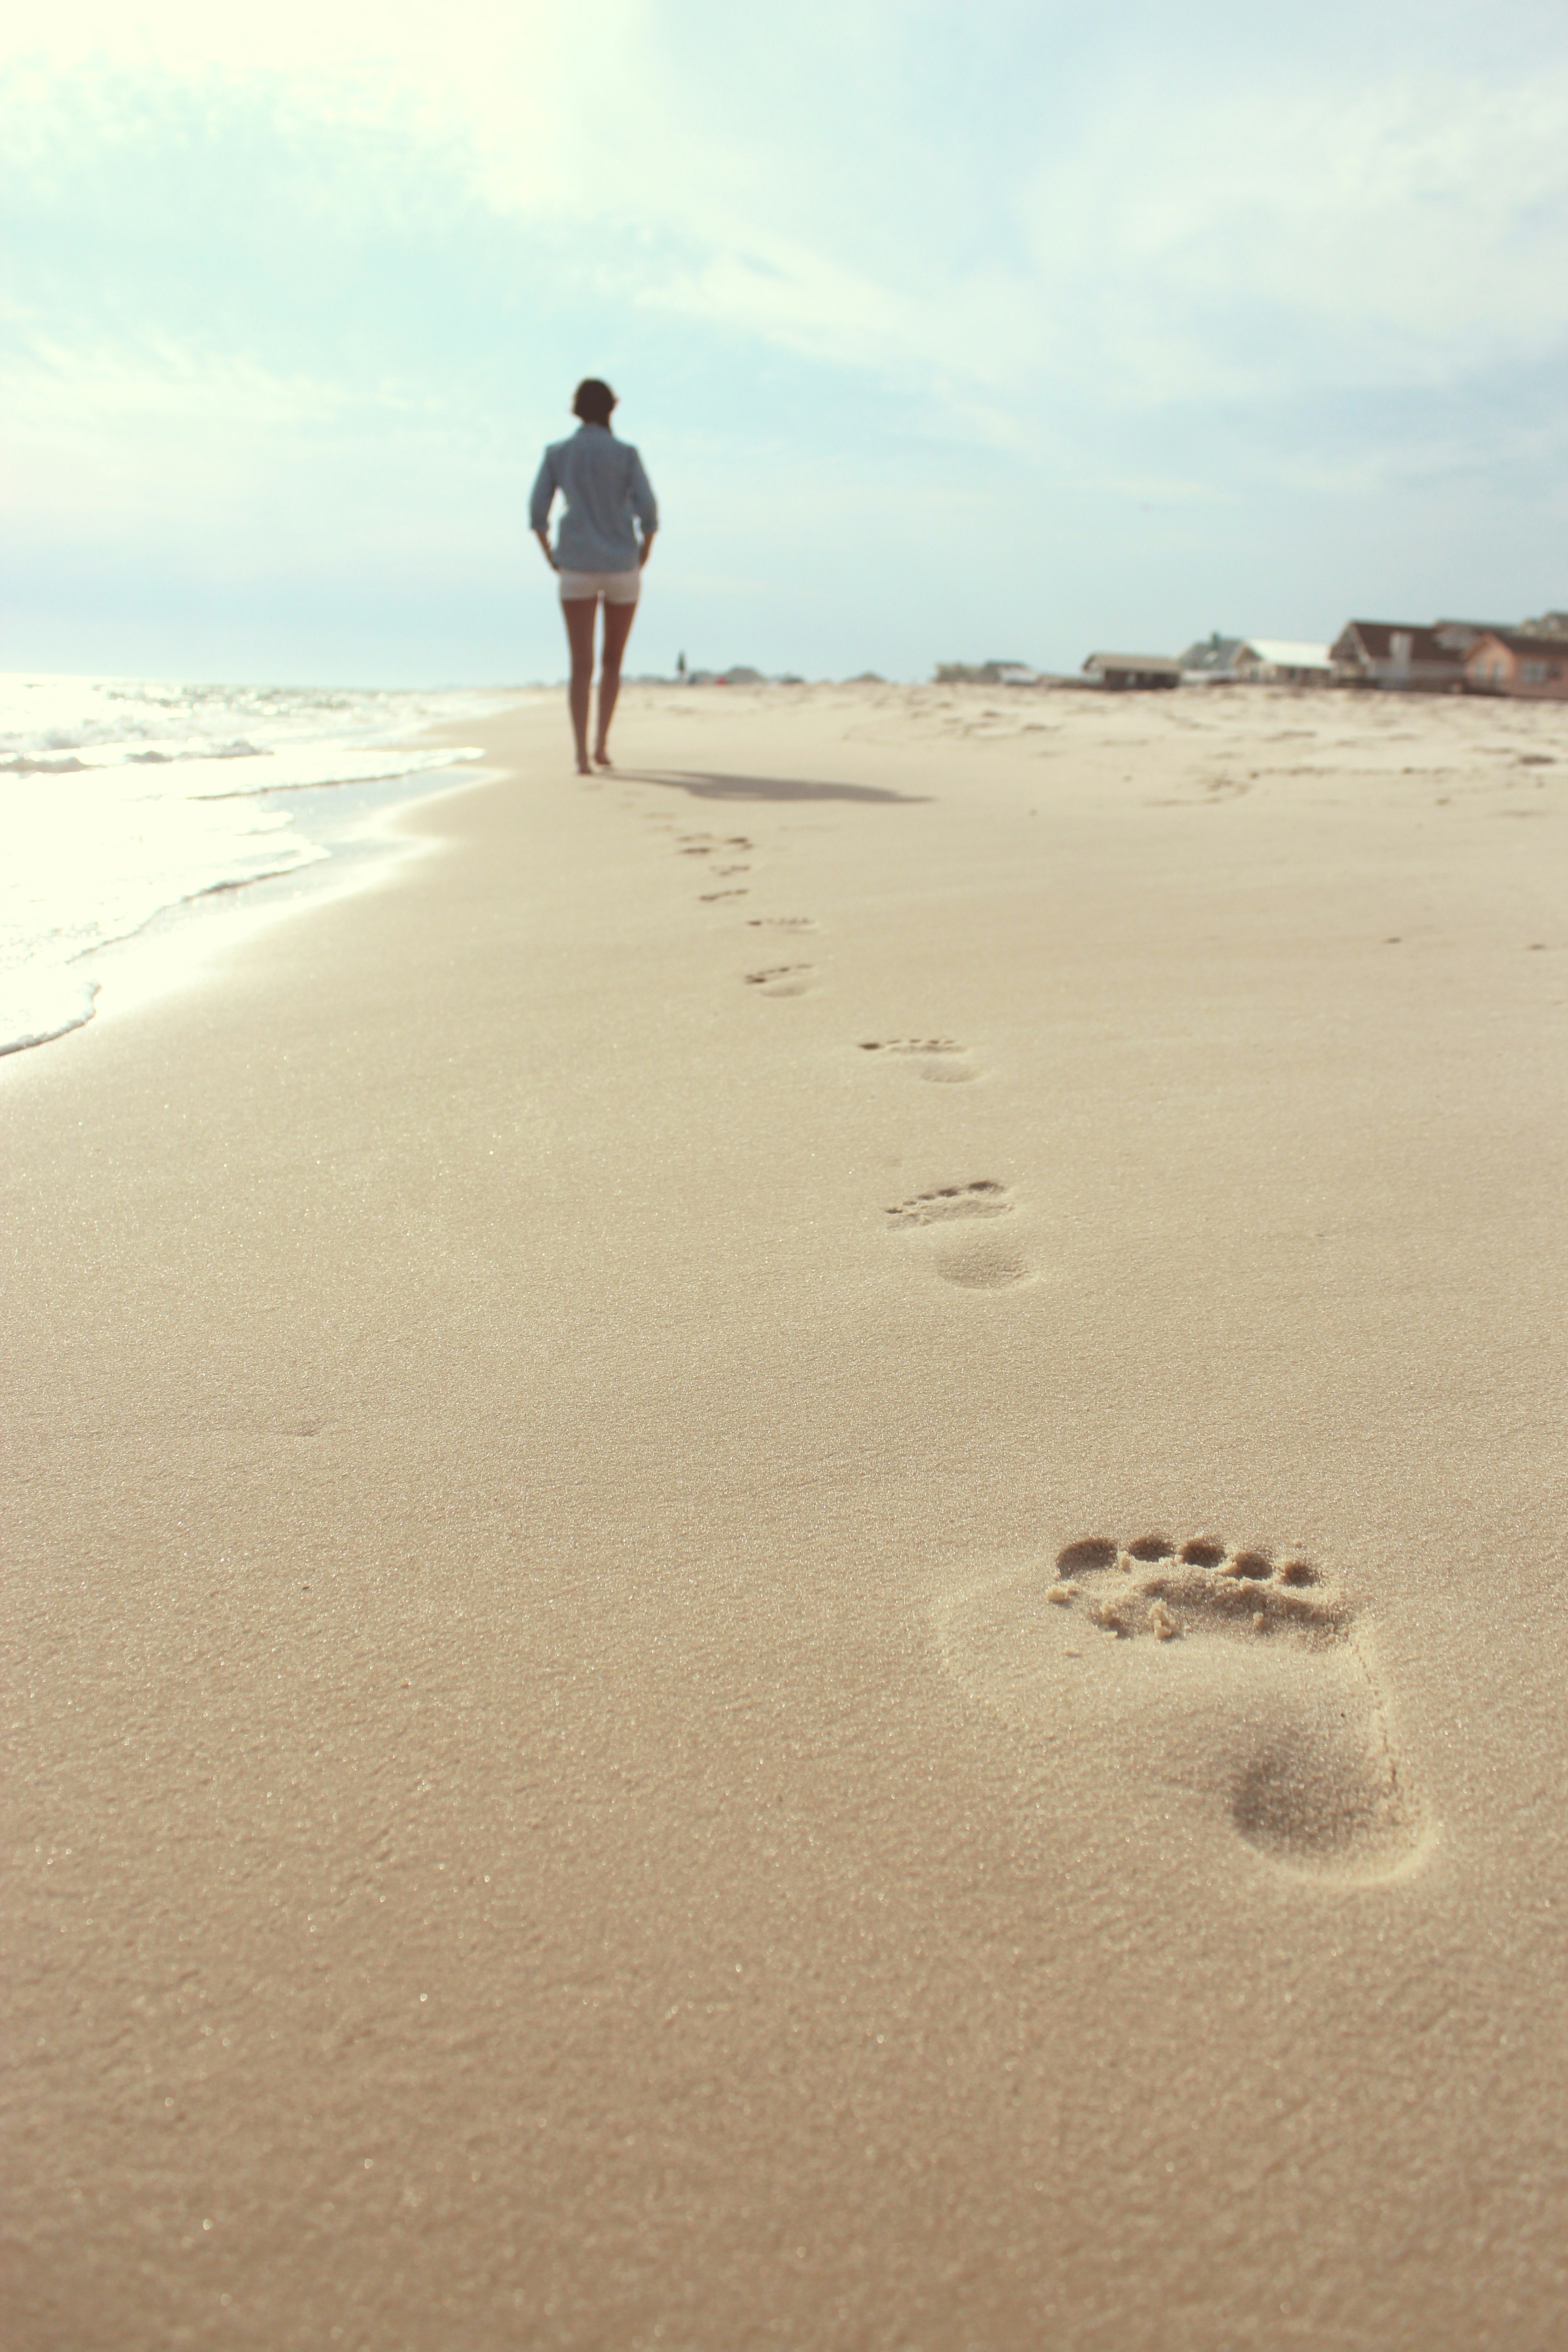 A woman walking on the beach | Source: Pexels